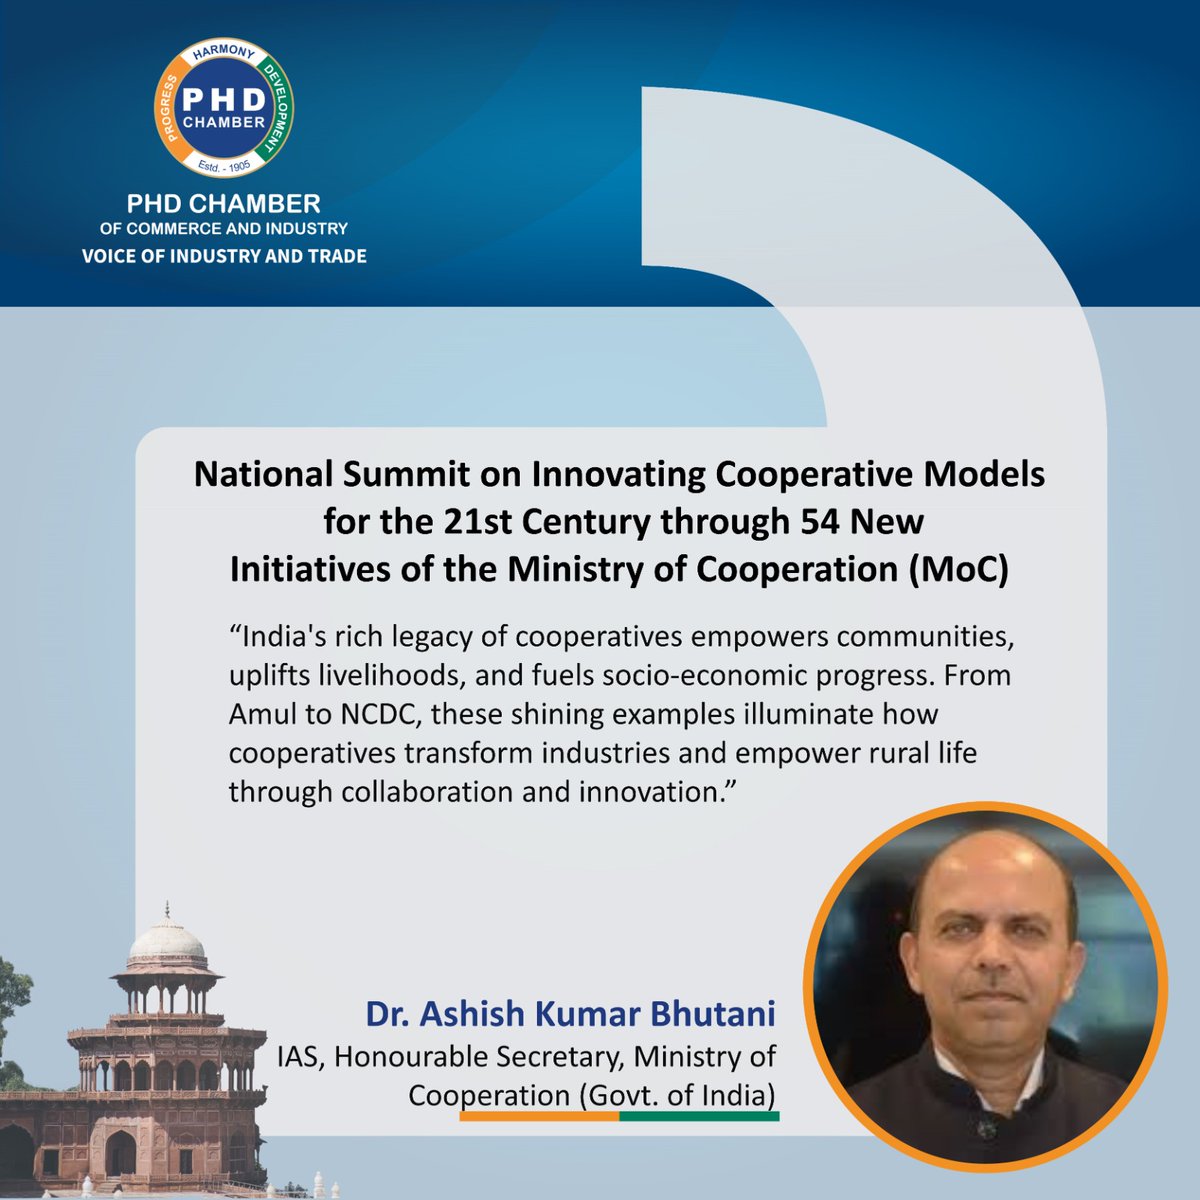 Today at the PHD Chamber, key speakers at 'National Summit on Innovating Cooperative Models for the 21st Century' shared insights quotes on the 54 new initiatives by the Ministry of Cooperation (MoC) #NationalSummit #InnovativeCooperativeModels #MinistryOfCooperation #PHDCCI